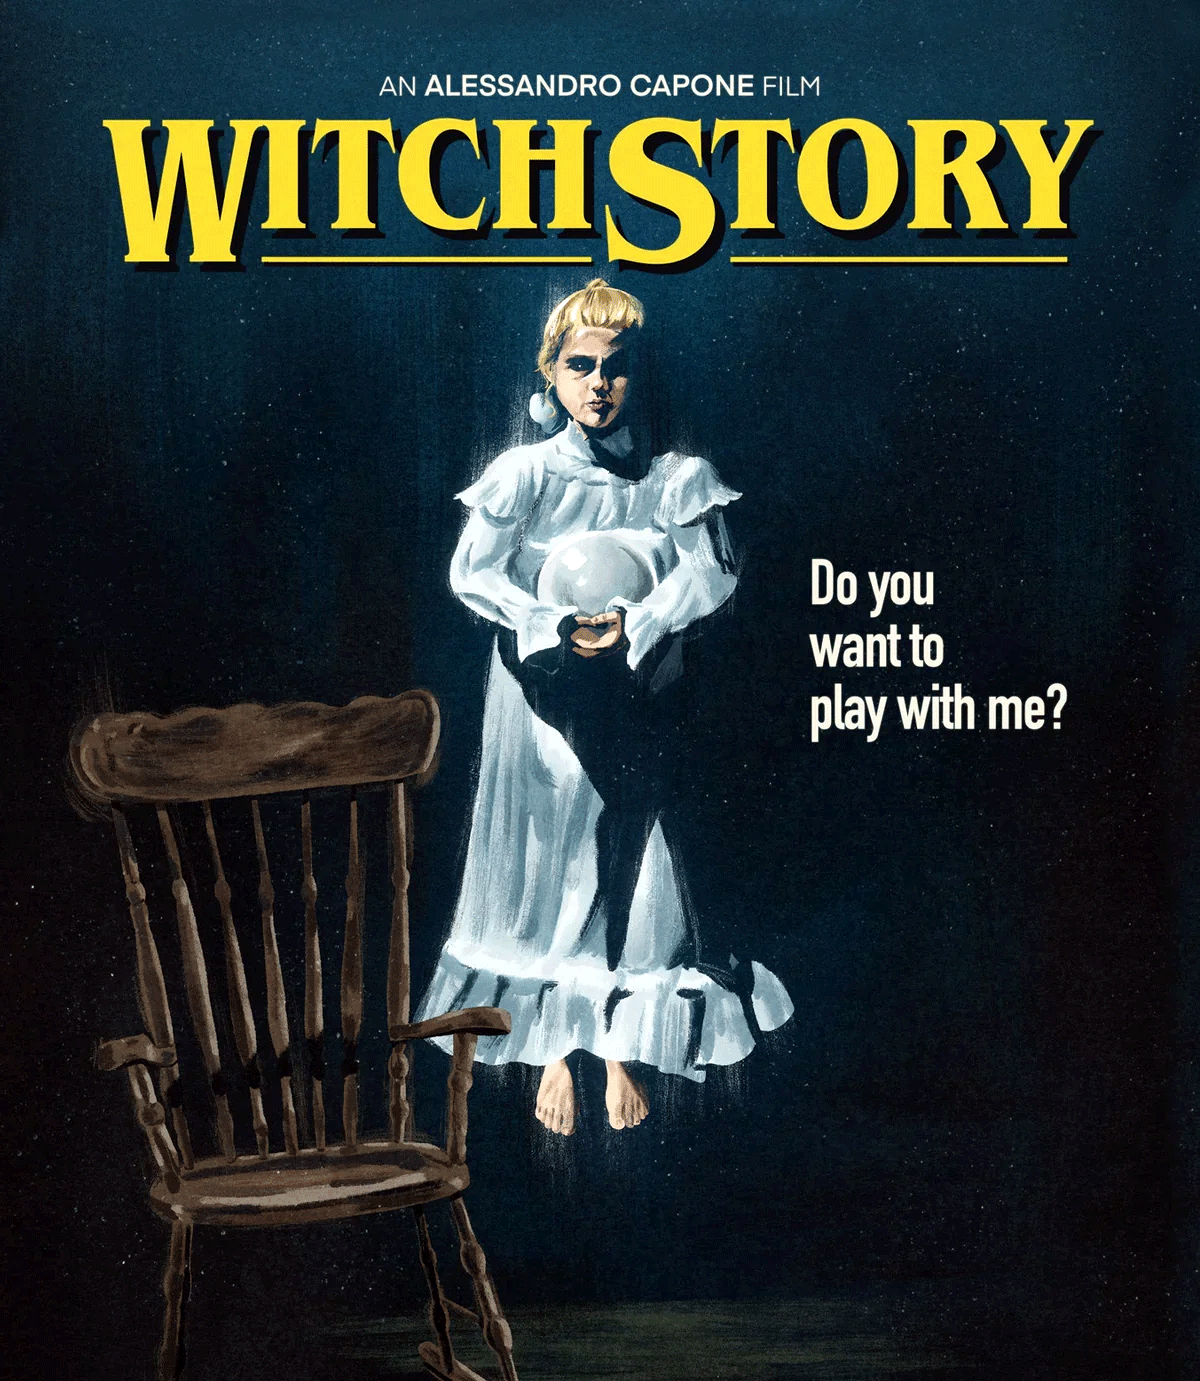 WITCH STORY - 4K ULTRA HD / BLU-RAY (LIMITED EDITION)